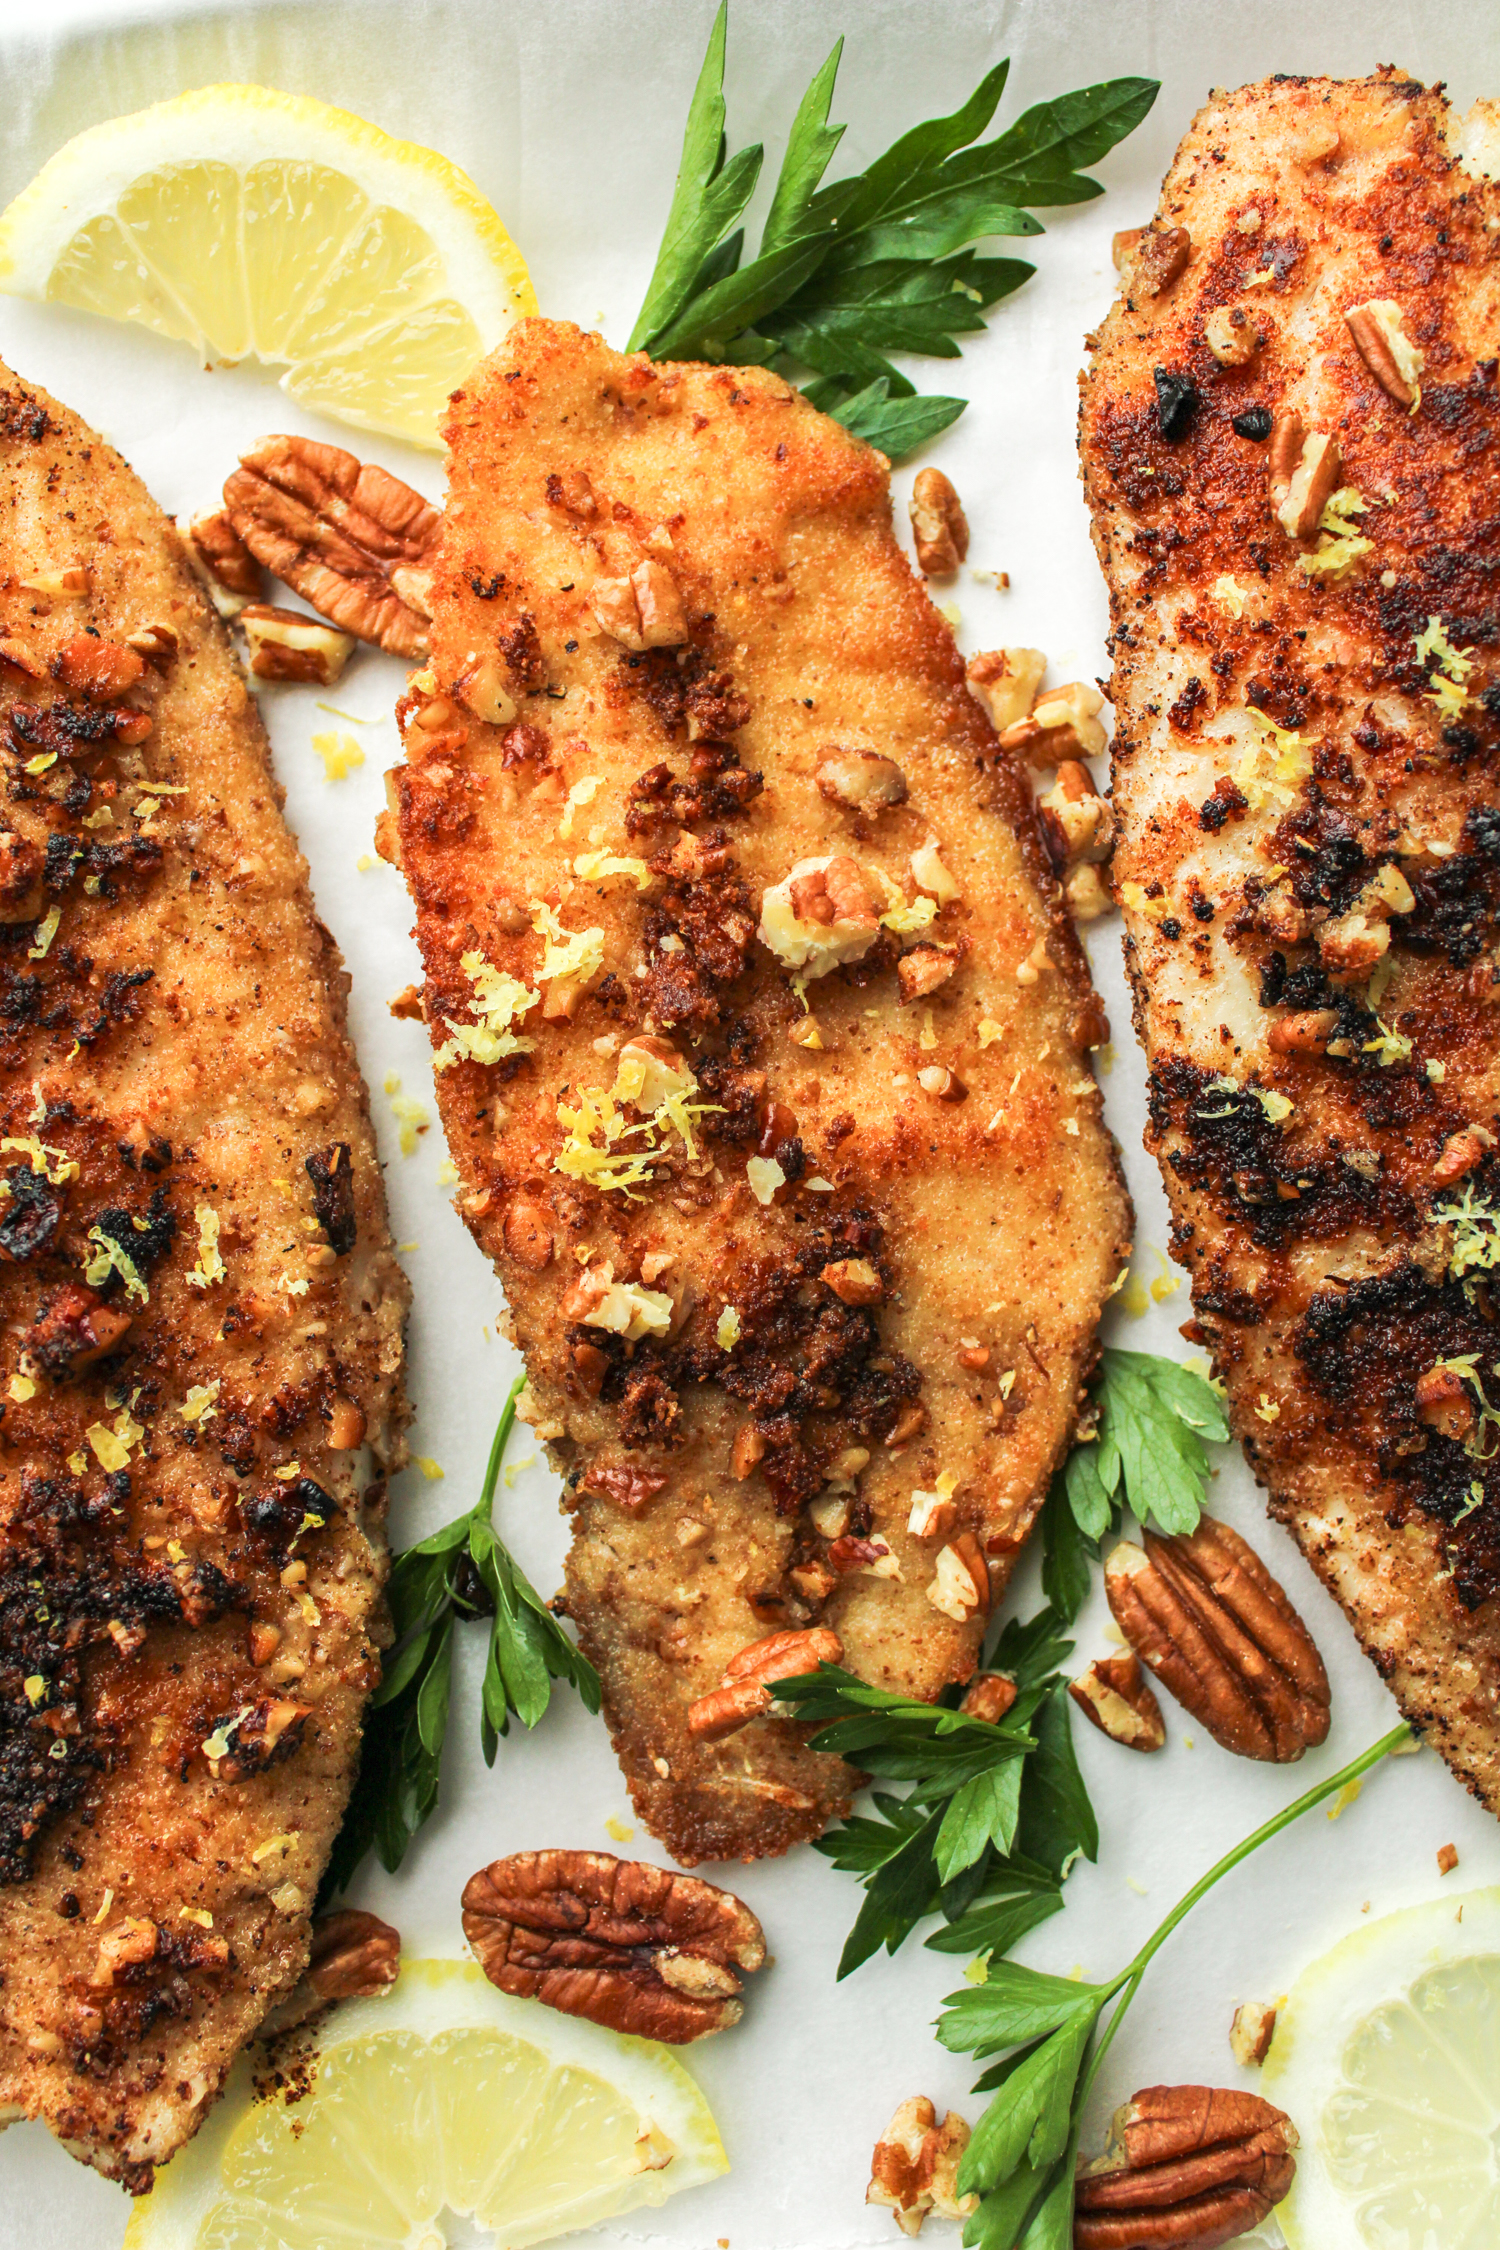 3 fillets of pecan crusted tilapia topped with chopped pecans, lemon zest and parsley